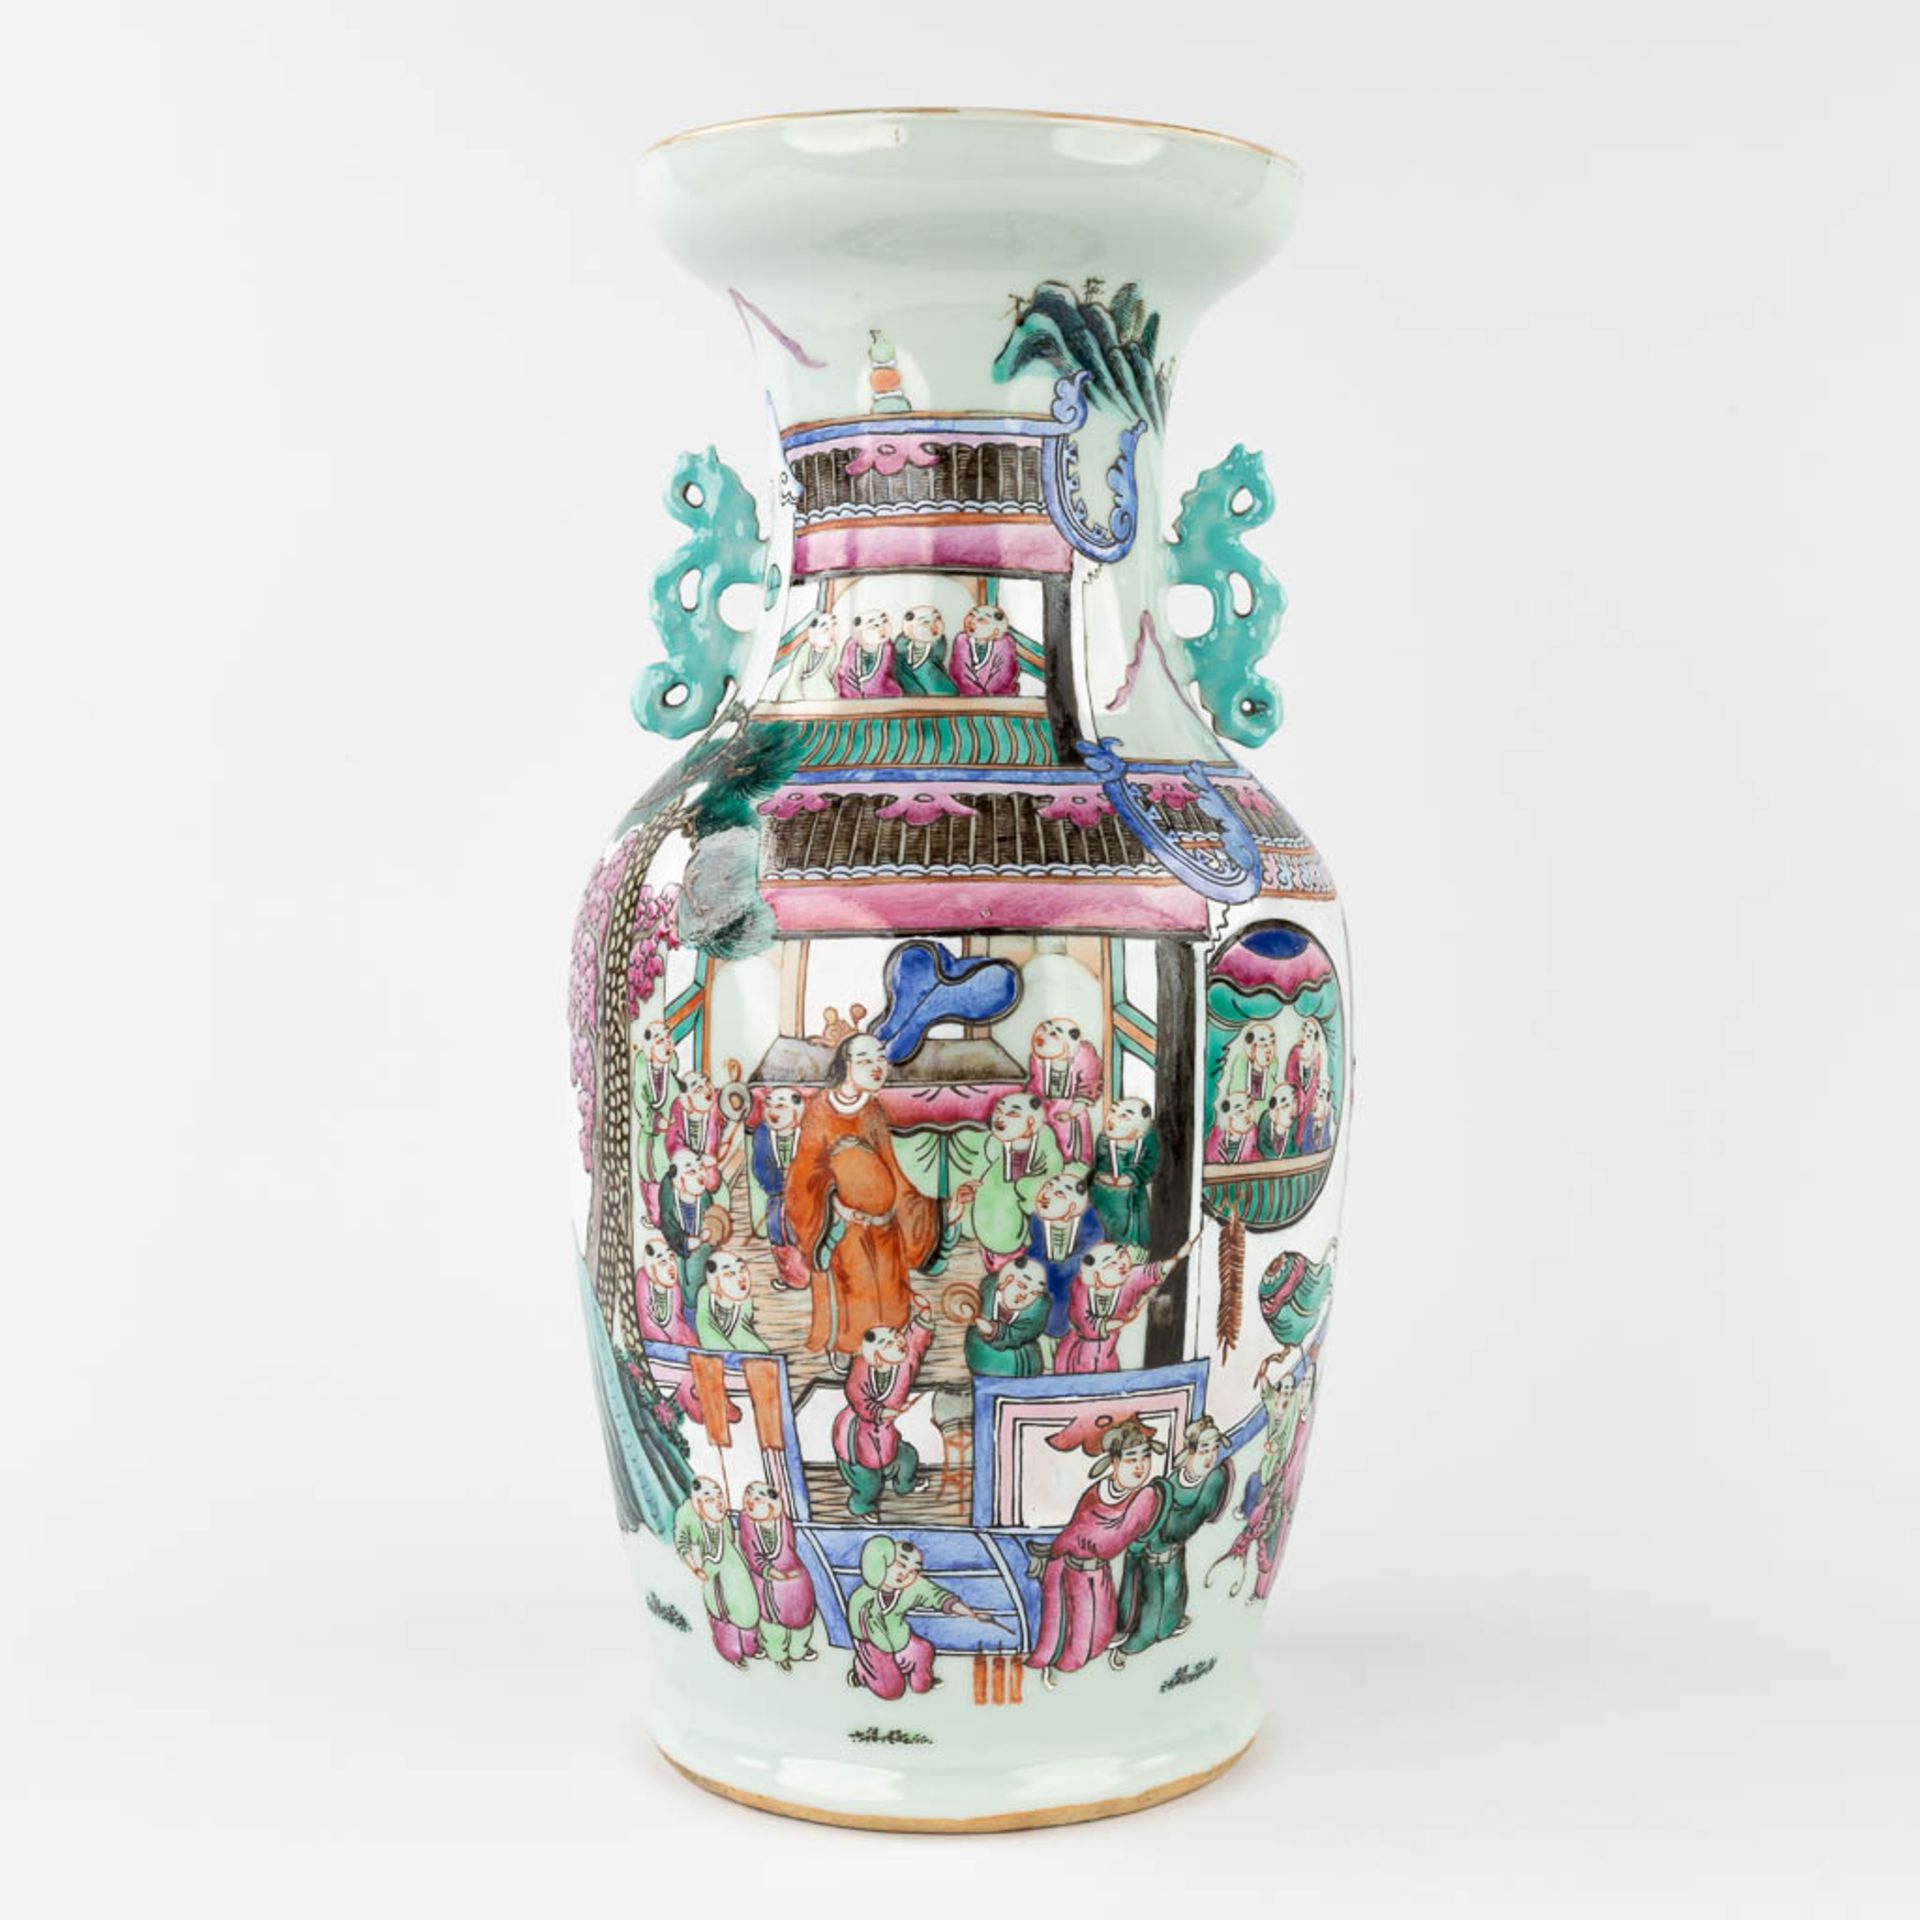 A Chinese Famille Rose '100 Boys' vase. 19th C. (H:44 x D:23 cm) - Image 5 of 13